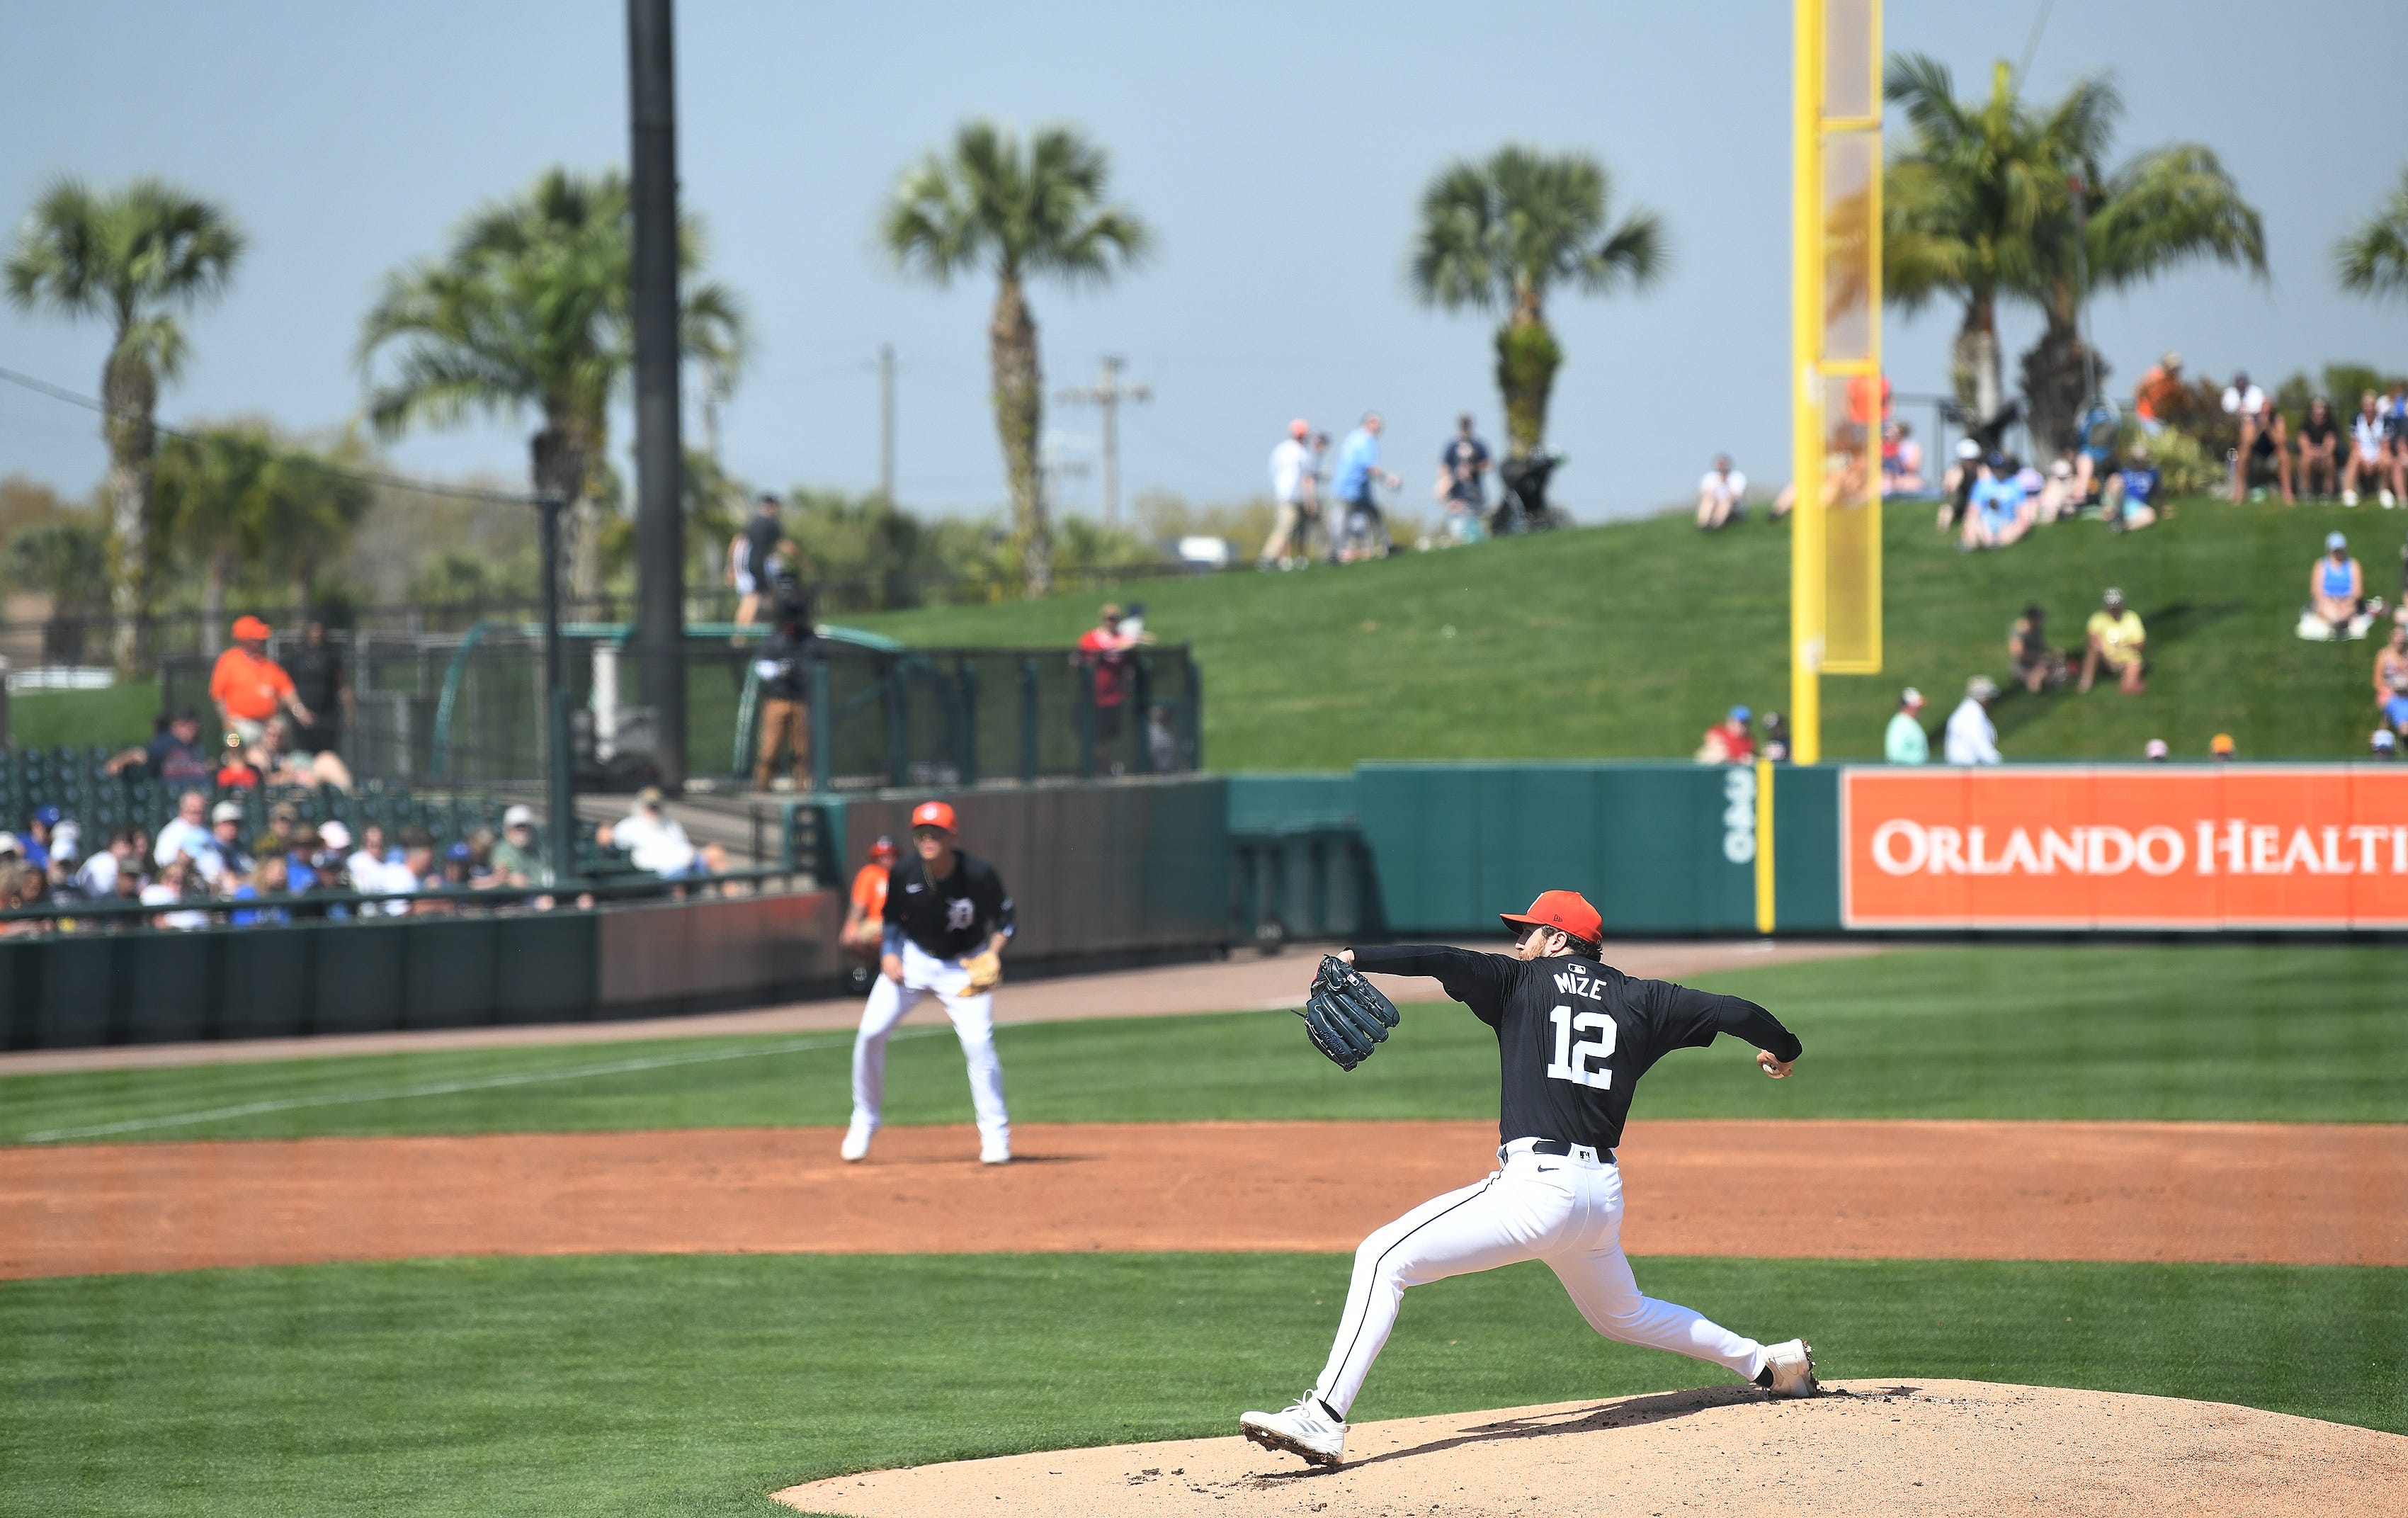 No. 12 Casey Mize – RHP, 6-3, 230, Age in season: 27

Maybe the best story of spring. Out for close to two years recovering from two major surgeries (back and elbow), Mize was the mystery candidate in the club’s rotation battle. But he stormed into spring 20 pounds stronger with a much more athletic and fluid delivery and a revved up (94-97 mph) four-seam fastball that he challenged hitters with and won all spring. Being able to attack at the top and at the bottom of the zone with a fastball is a game-changer for Mize, who pitched more down in the zone off his slider and splitter before the surgery. He'll tell you, too, it’s been the back surgery more than the elbow surgery that’s allowed him to both improve his quality of life and revitalize himself as a pitcher.

2024 salary: $830,000